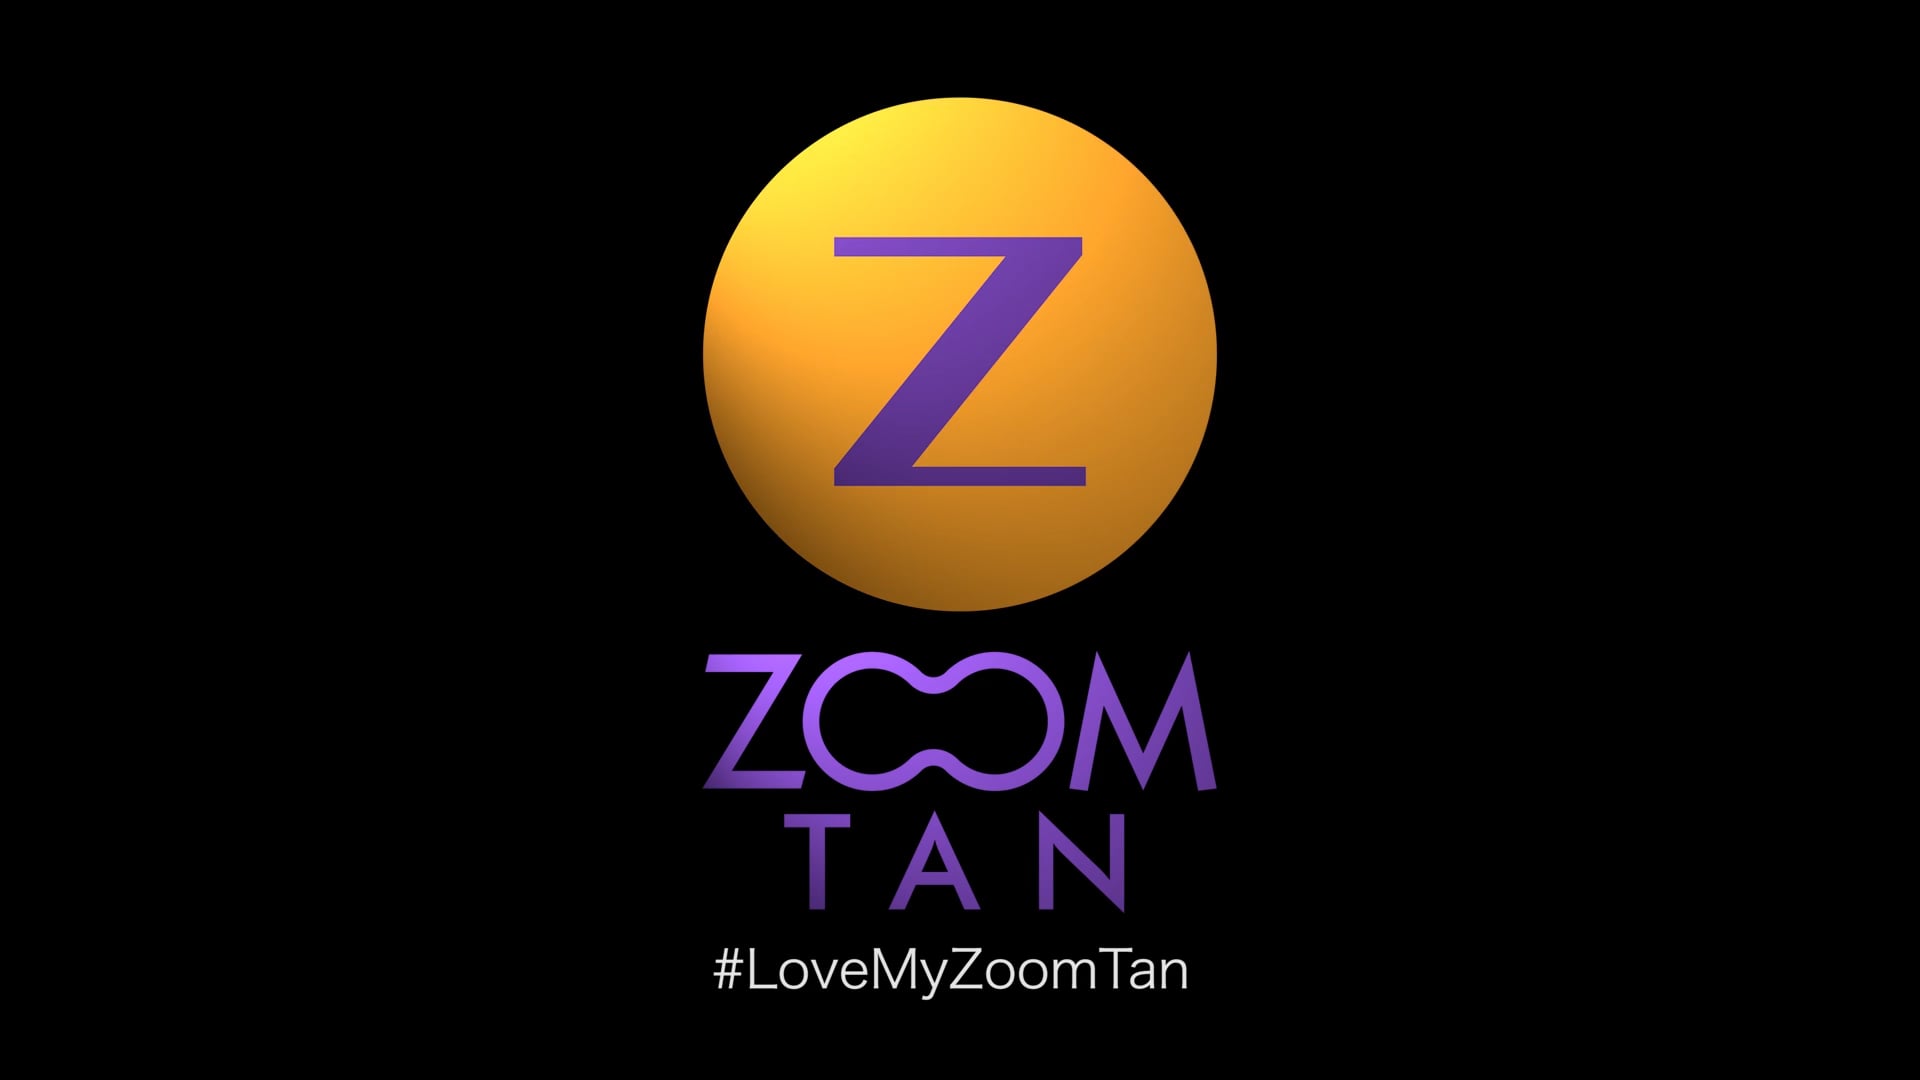 Zoom Tan Commercial (15 Seconds)